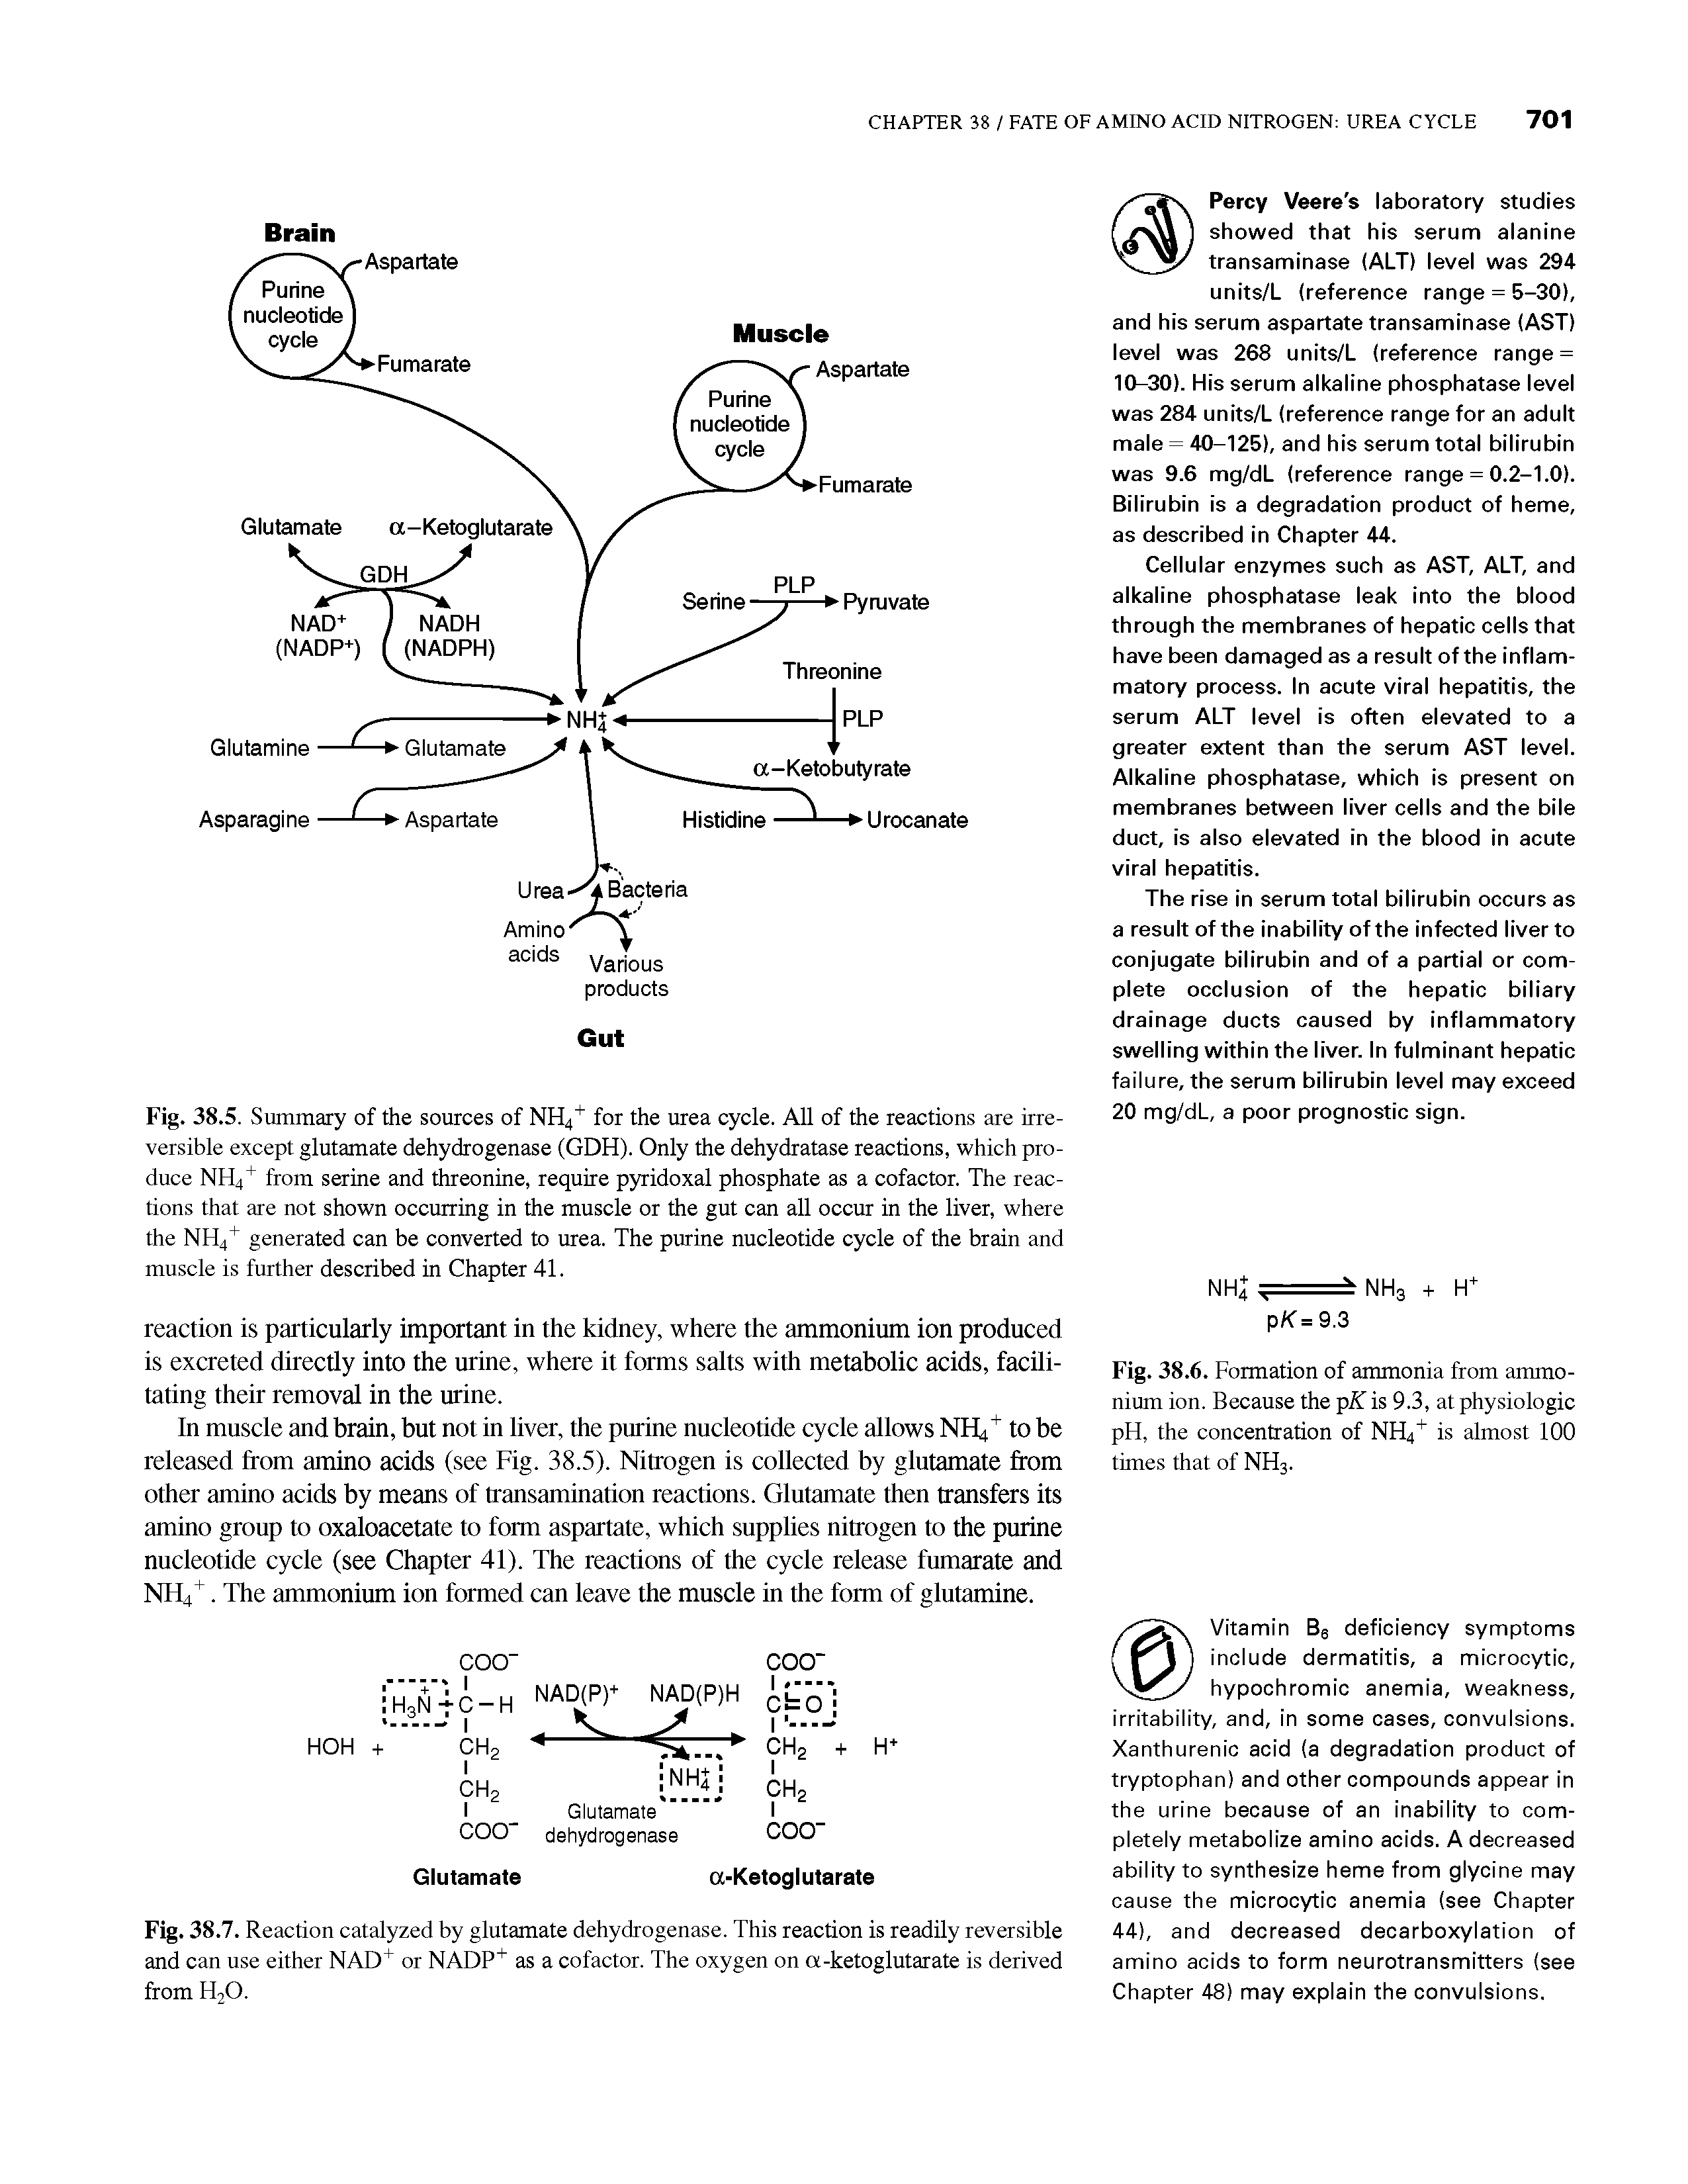 Fig. 38.5. Summary of the sources of NH4 for the urea cycle. All of the reactions are irreversible except glutamate dehydrogenase (GDH). Only the dehydratase reactions, which produce NH4 from serine and threonine, require pyridoxal phosphate as a cofactor. The reactions that are not shown occurring in the muscle or the gut can all occur in the liver, where the NH4 generated can be converted to urea. The purine nucleotide cycle of the brain and muscle is further described in Chapter 41.